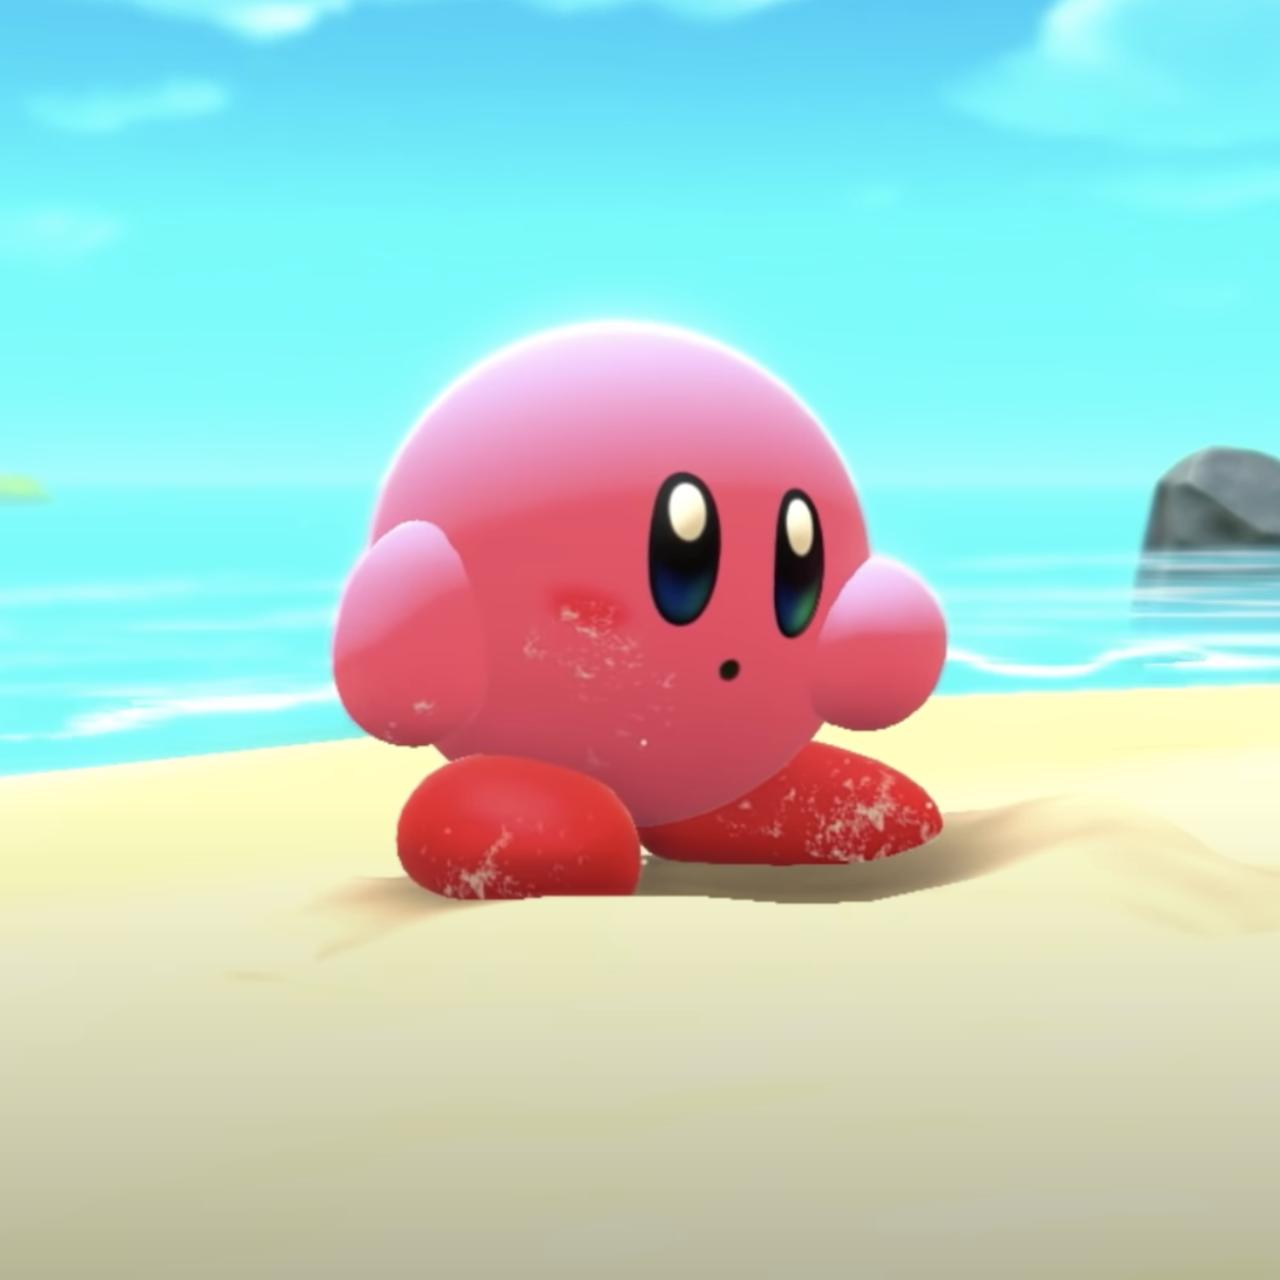 A new Kirby game is coming this year